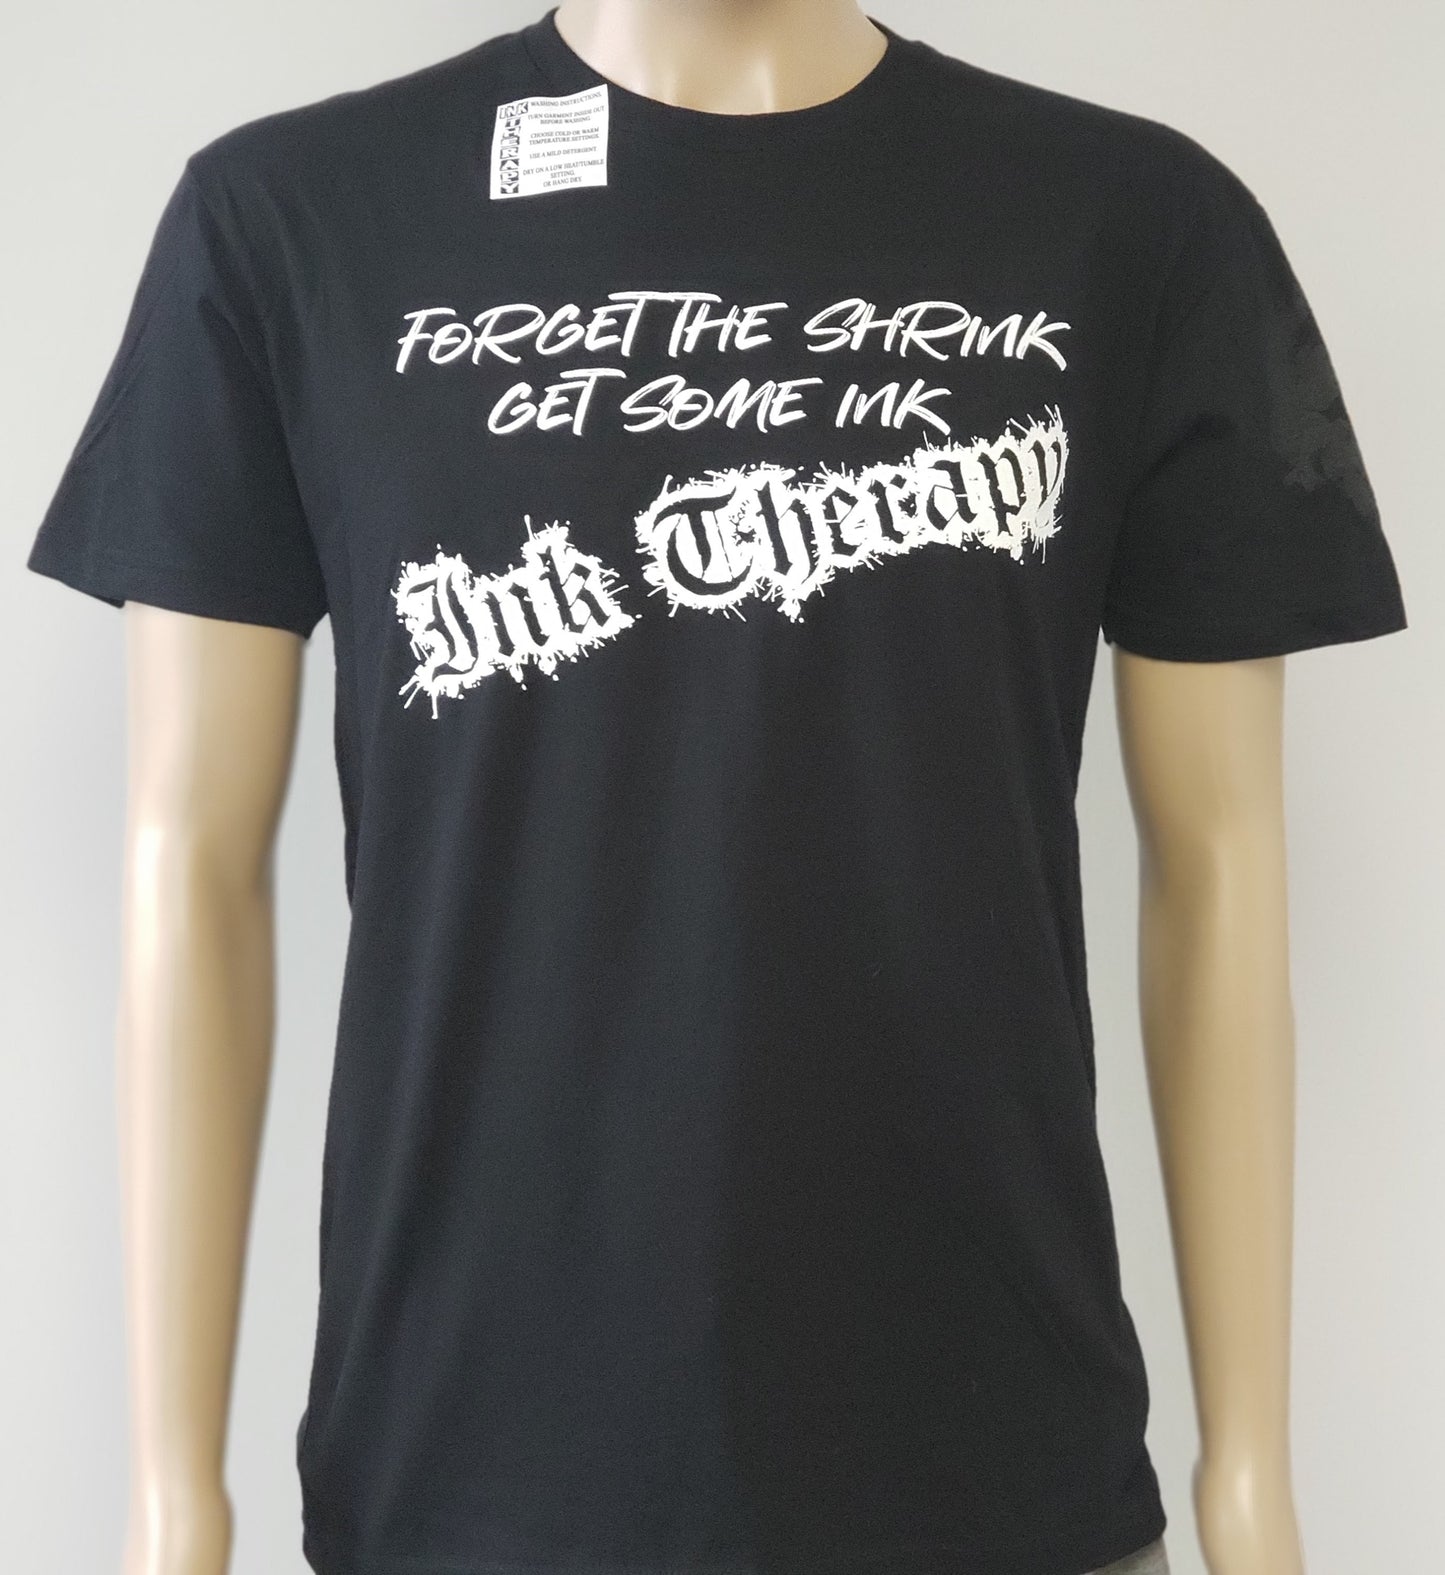 "Forget The Shrink.." T-shirt